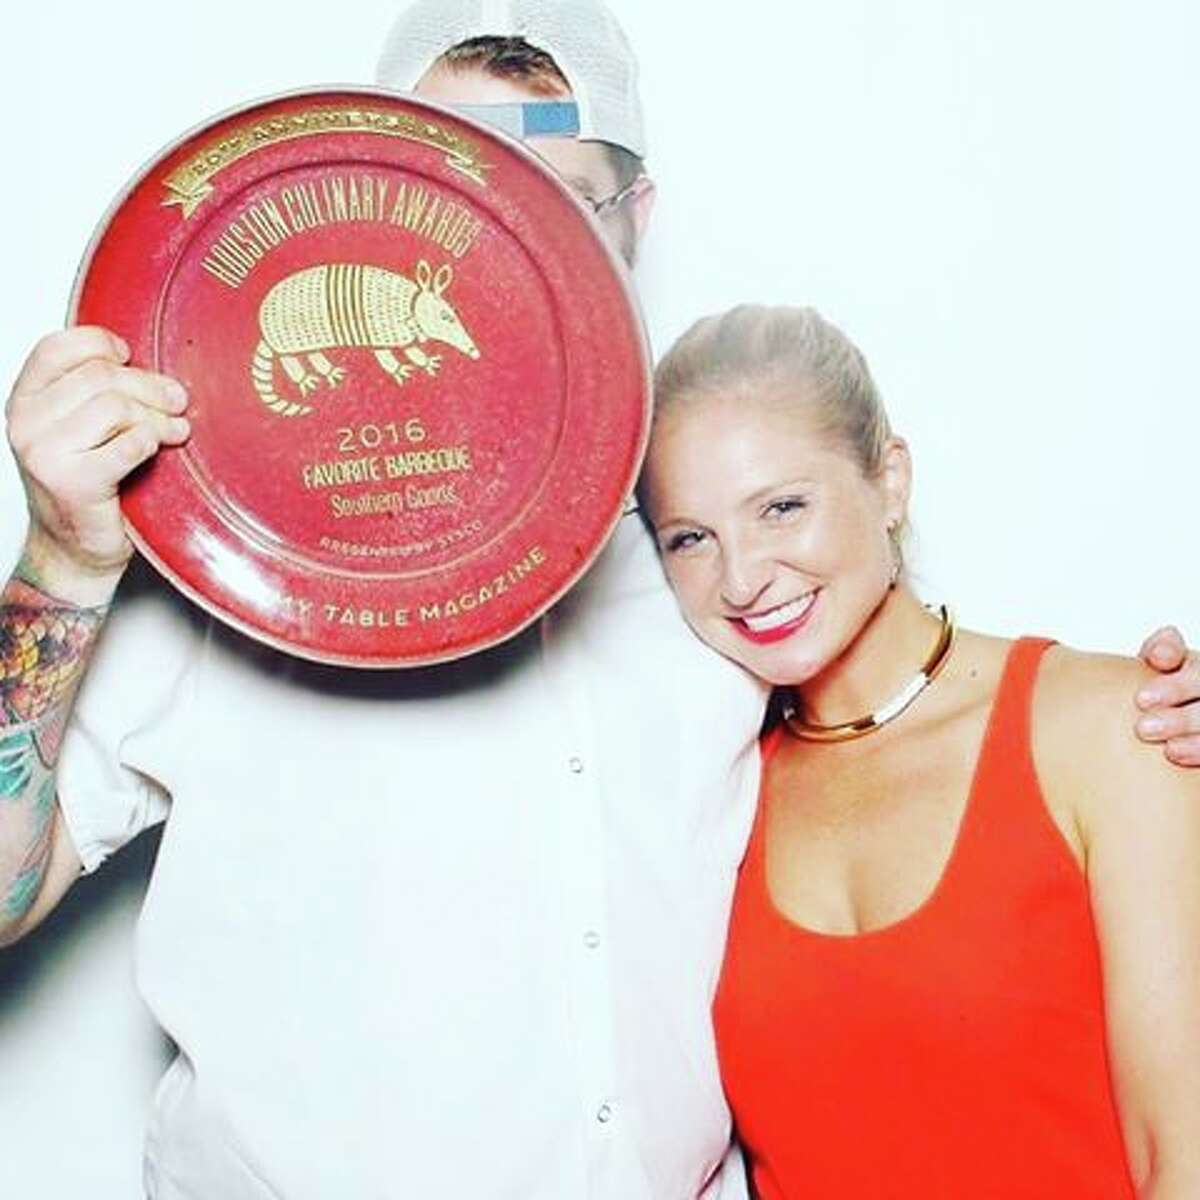 Chef Patrick Feges of Southern Goods, hiding behind his award for Favorite Barbecue at the Houston Culinary Awards, with his wife, Erin Smith Feges